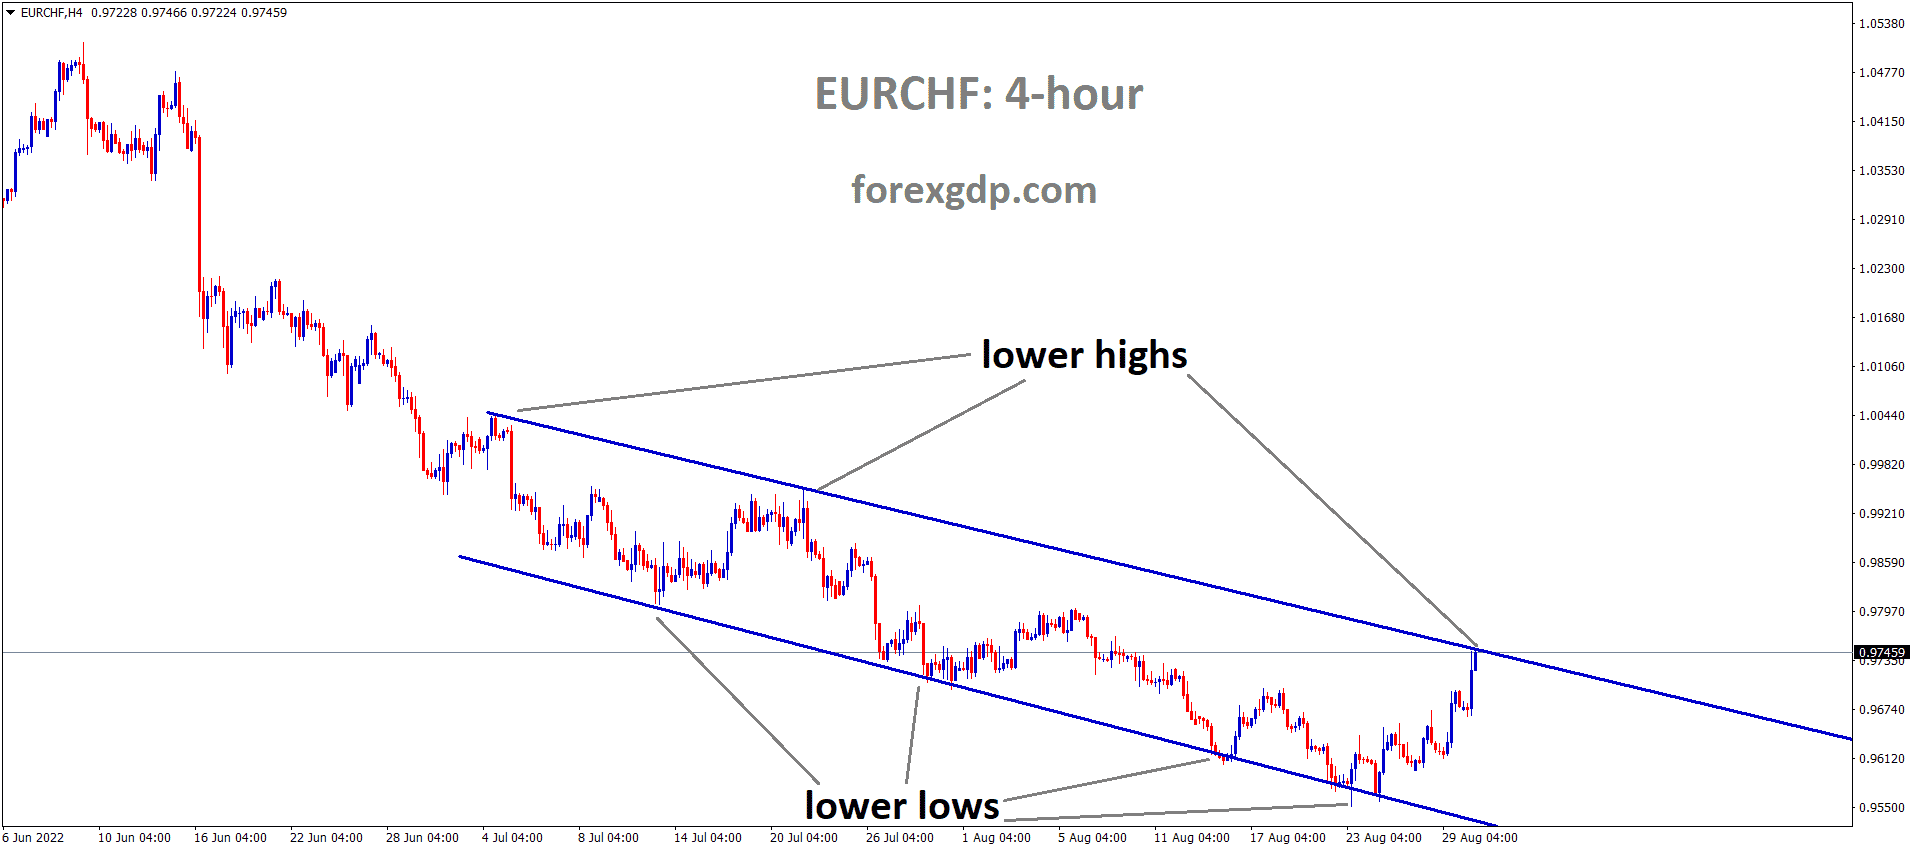 EURCHF is moving in the Descending channel and the Market has reached the Lower high area of the channel 1